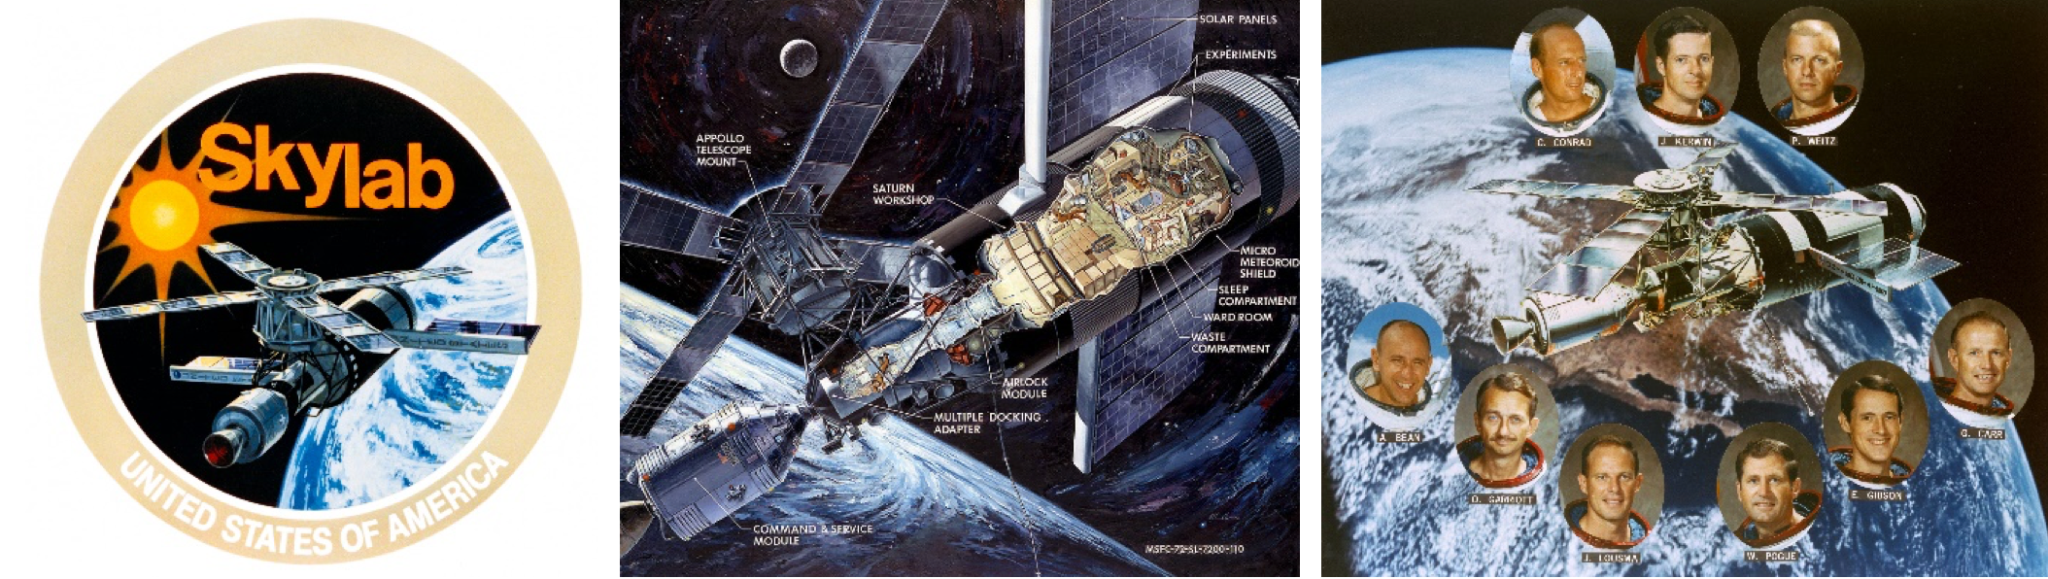 3 images: The skylab mission patch, showing the Skylab space station in orbit above Earth with the words Skylab and United States of America; a labeled drawing of the Skylab station, and an artwork of Skylab with the portraits of the 9 crewmembers who travelled to the space station and the Earth in the background.